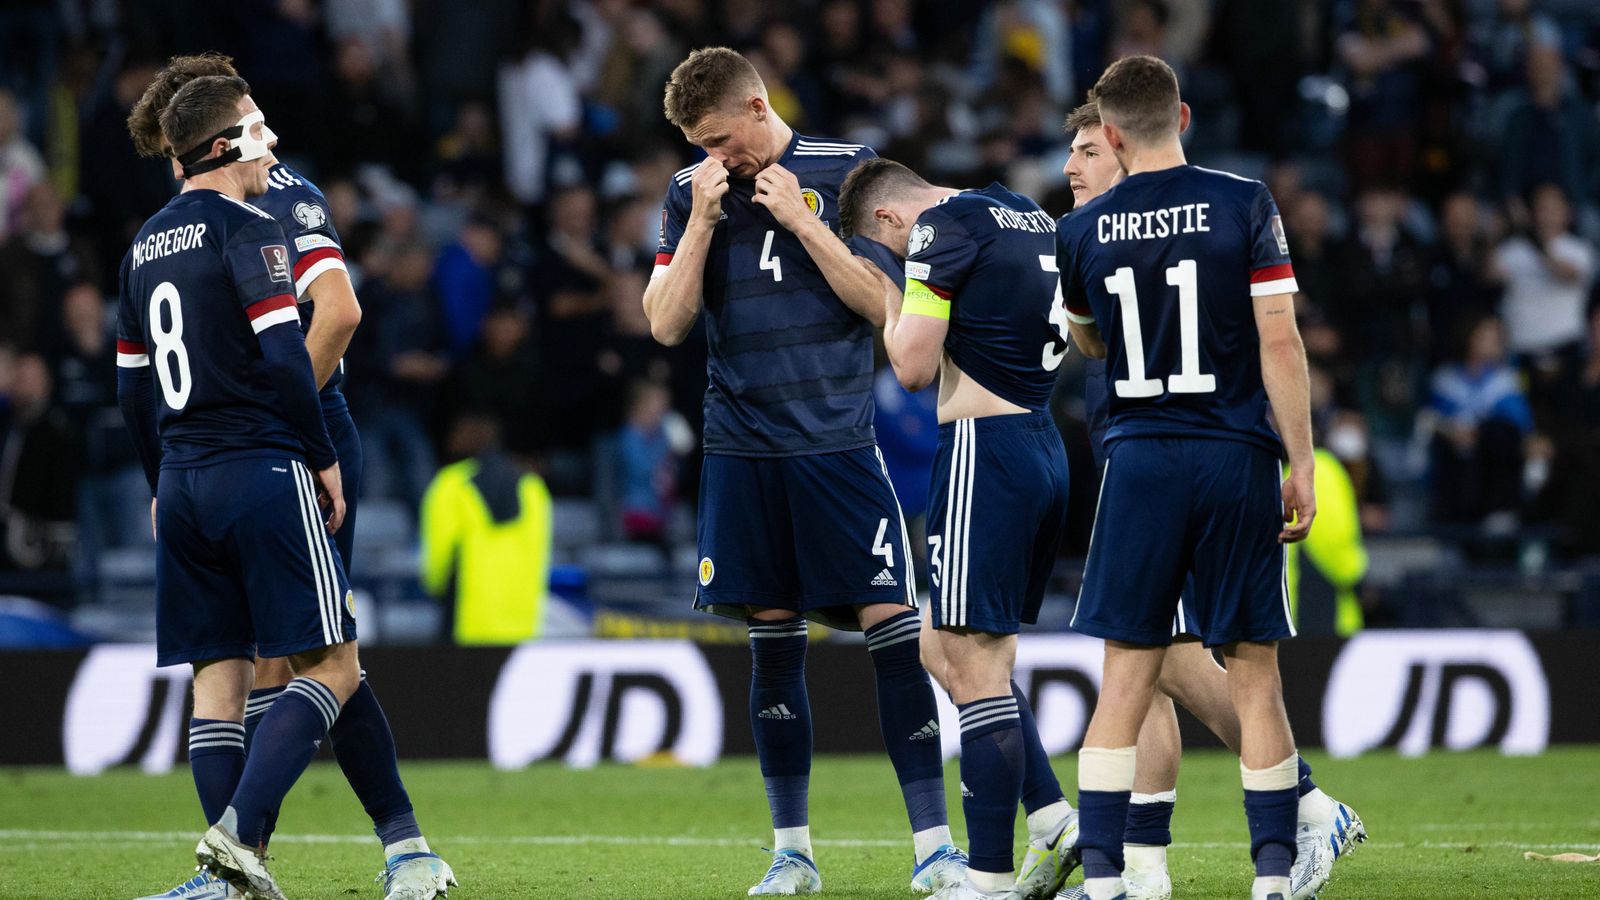 Scotland 1-3 Ukraine: Graeme Souness and Ally McCoist analyse what’s next for Steve Clarke’s side after World Cup play-off defeat